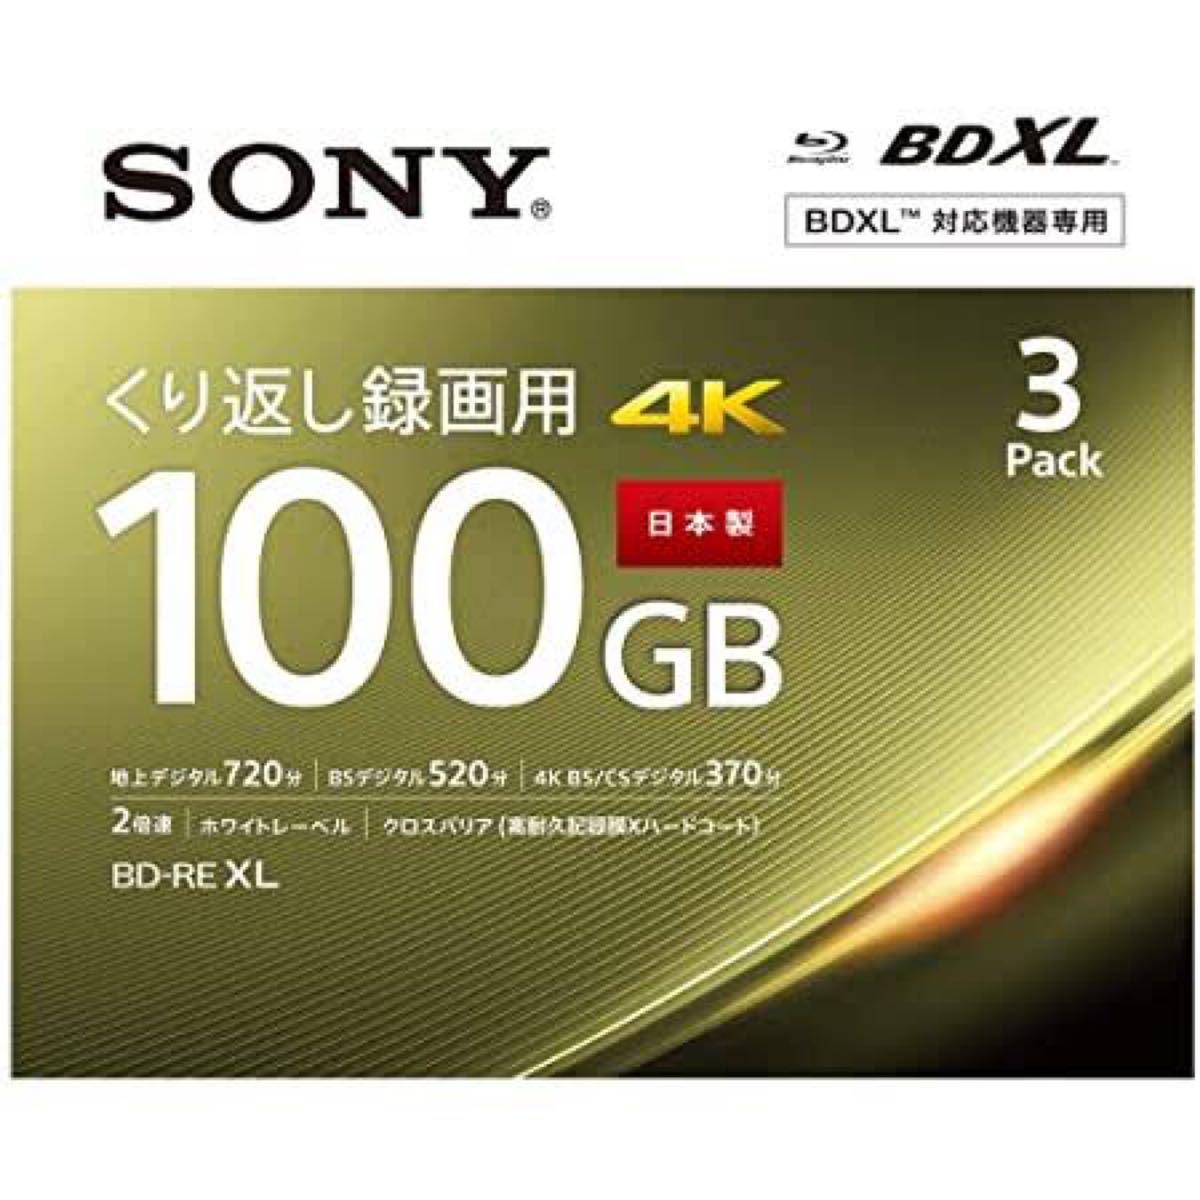 SONY 3BNE3VEPS2 BD-RE XL 100GB 送料無料